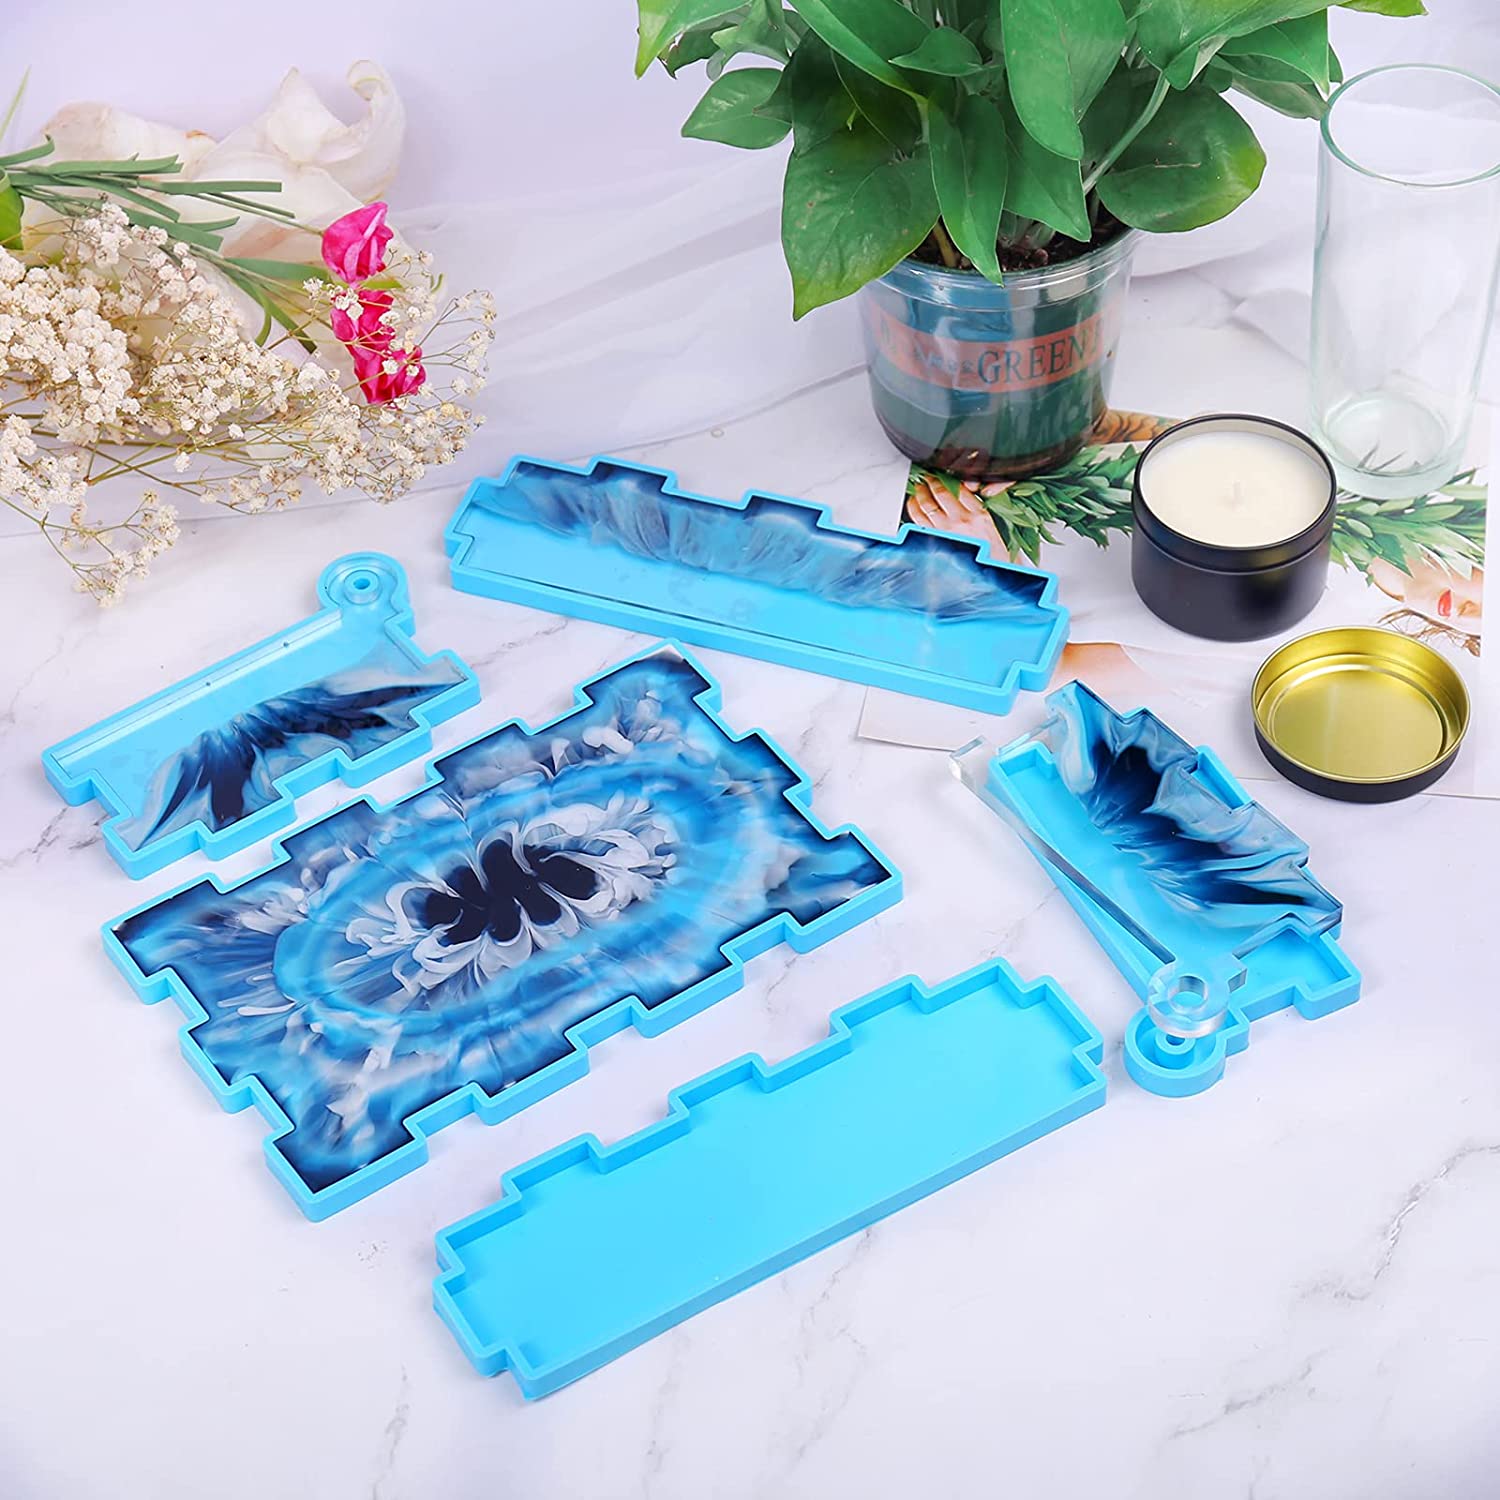 Resin Rectangle Box Mold Large Storage Container with Lid Set Mould for Casting